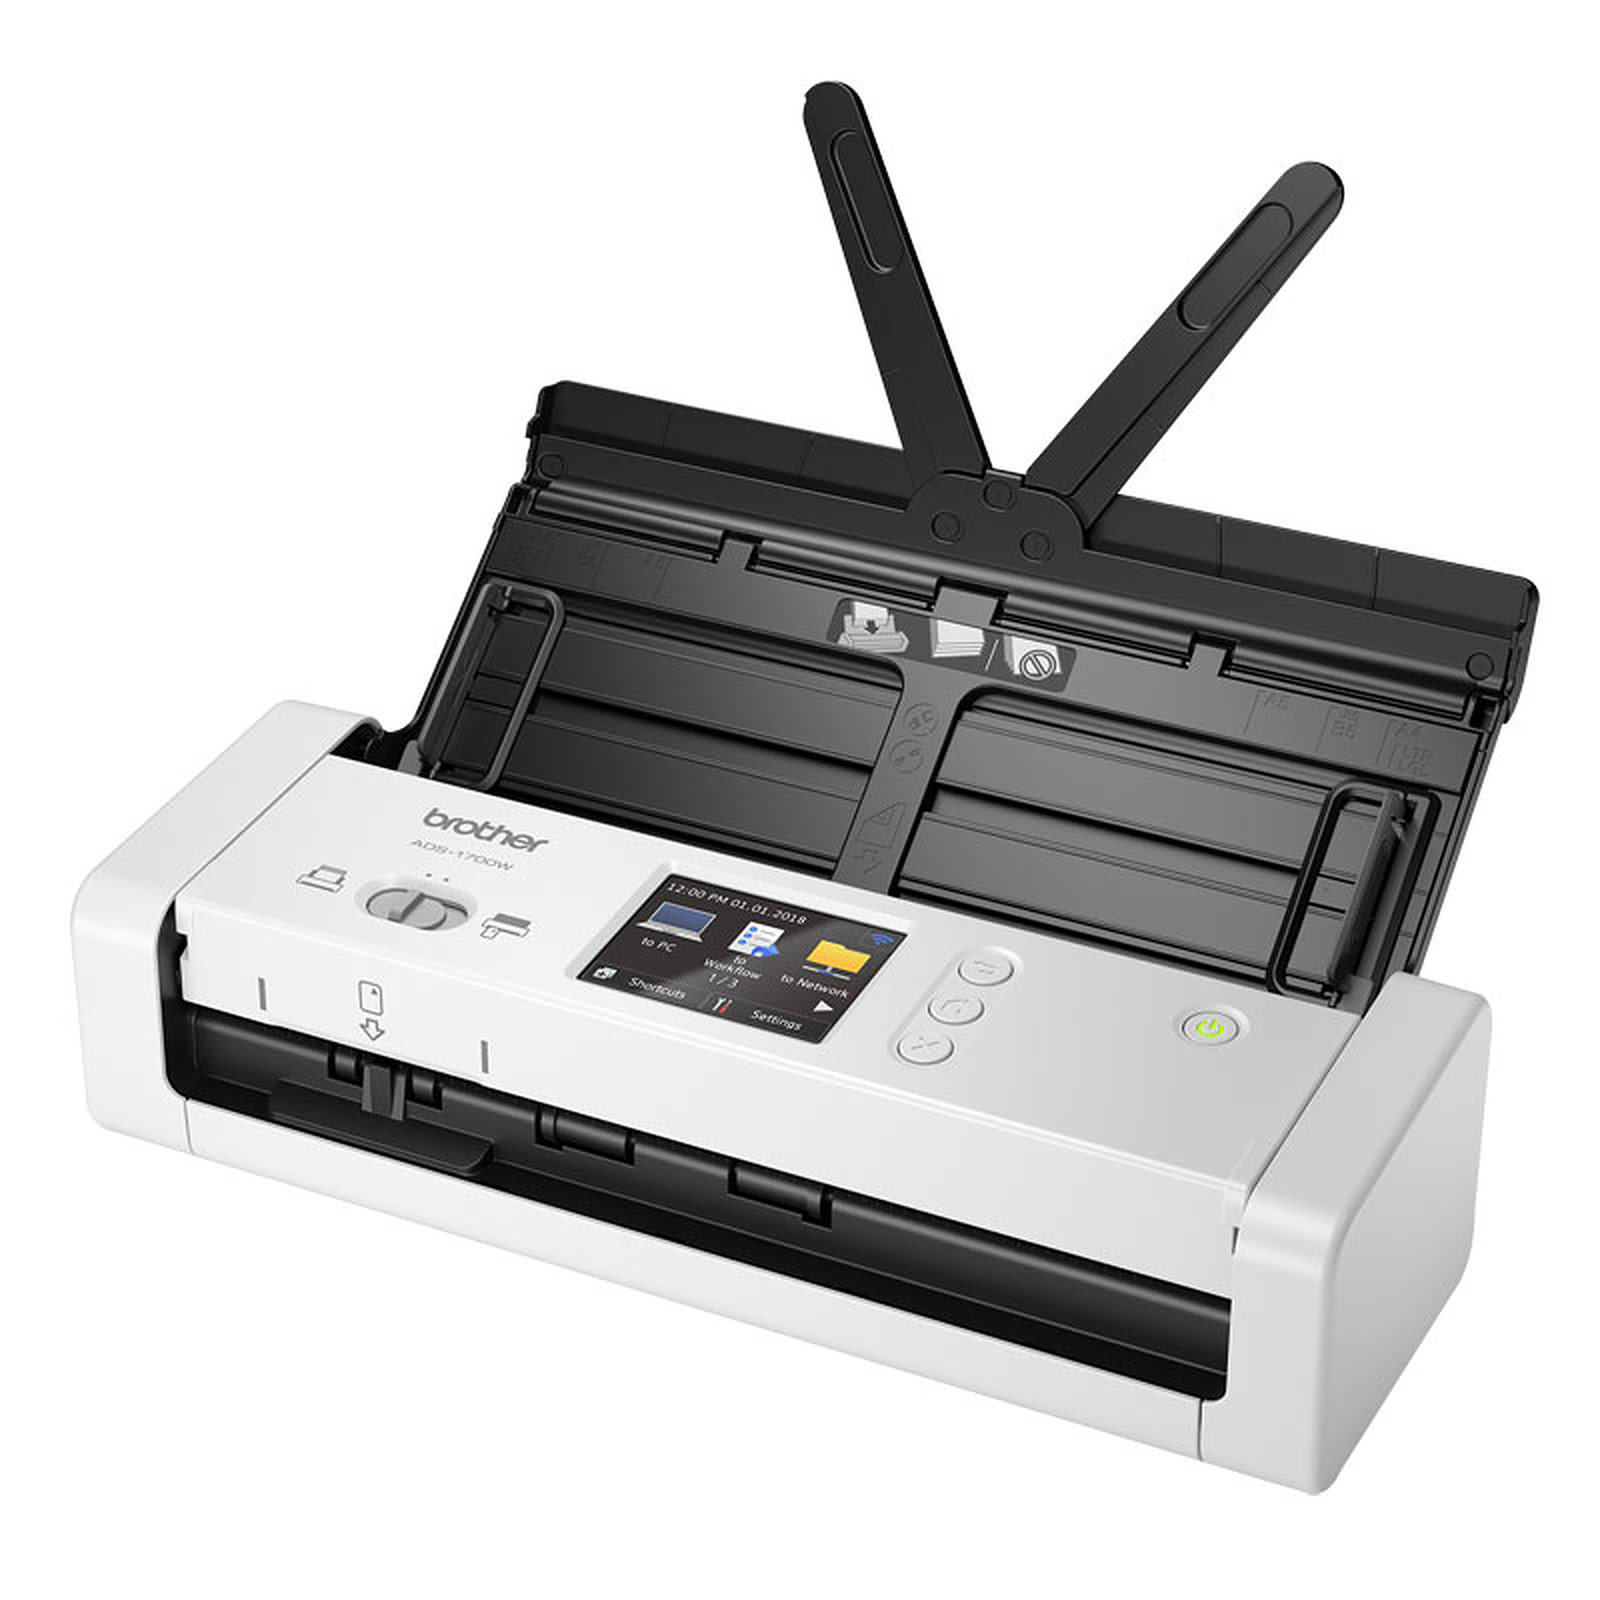 Brother ADS-1700W - Scanner Brother - grosbill-pro.com - 3